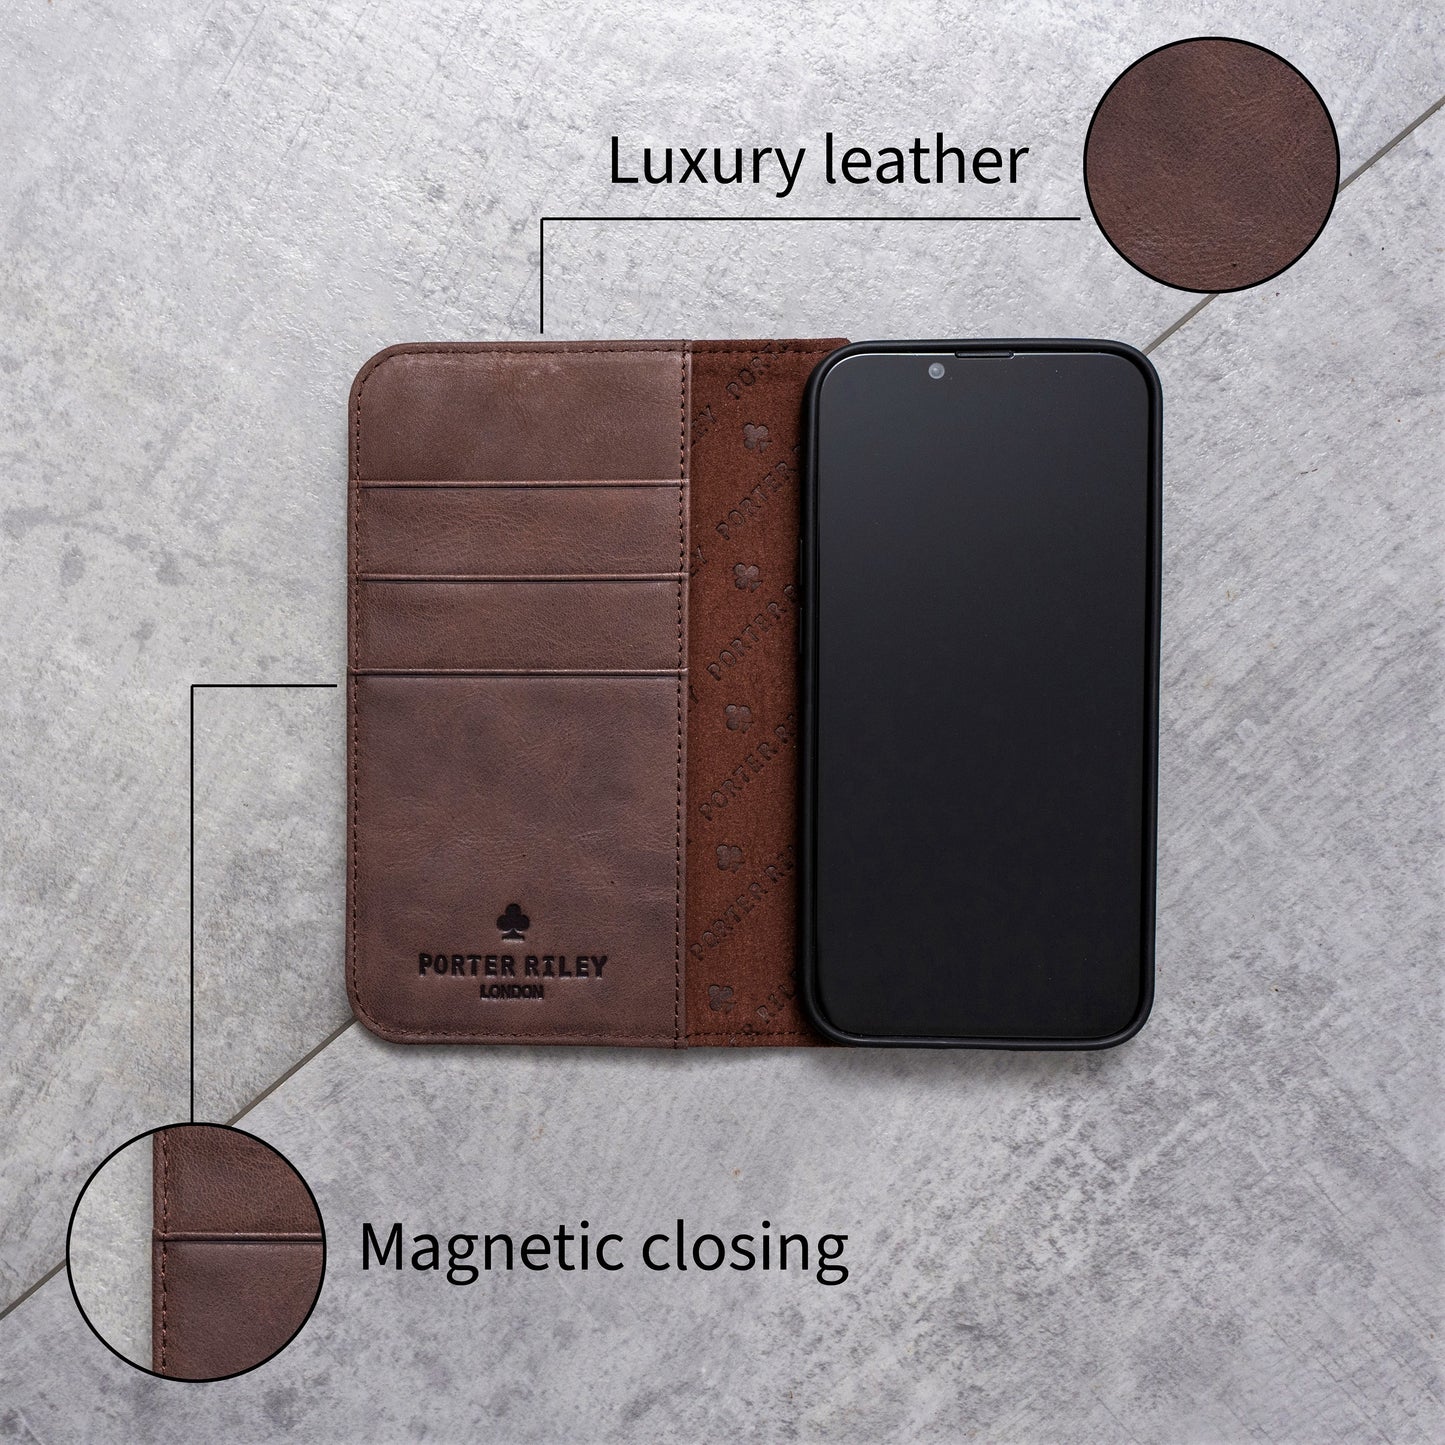 Samsung Galaxy S21 Ultra Leather Case. Premium Slim Genuine Leather Stand Case/Cover/Wallet (Chocolate Brown)